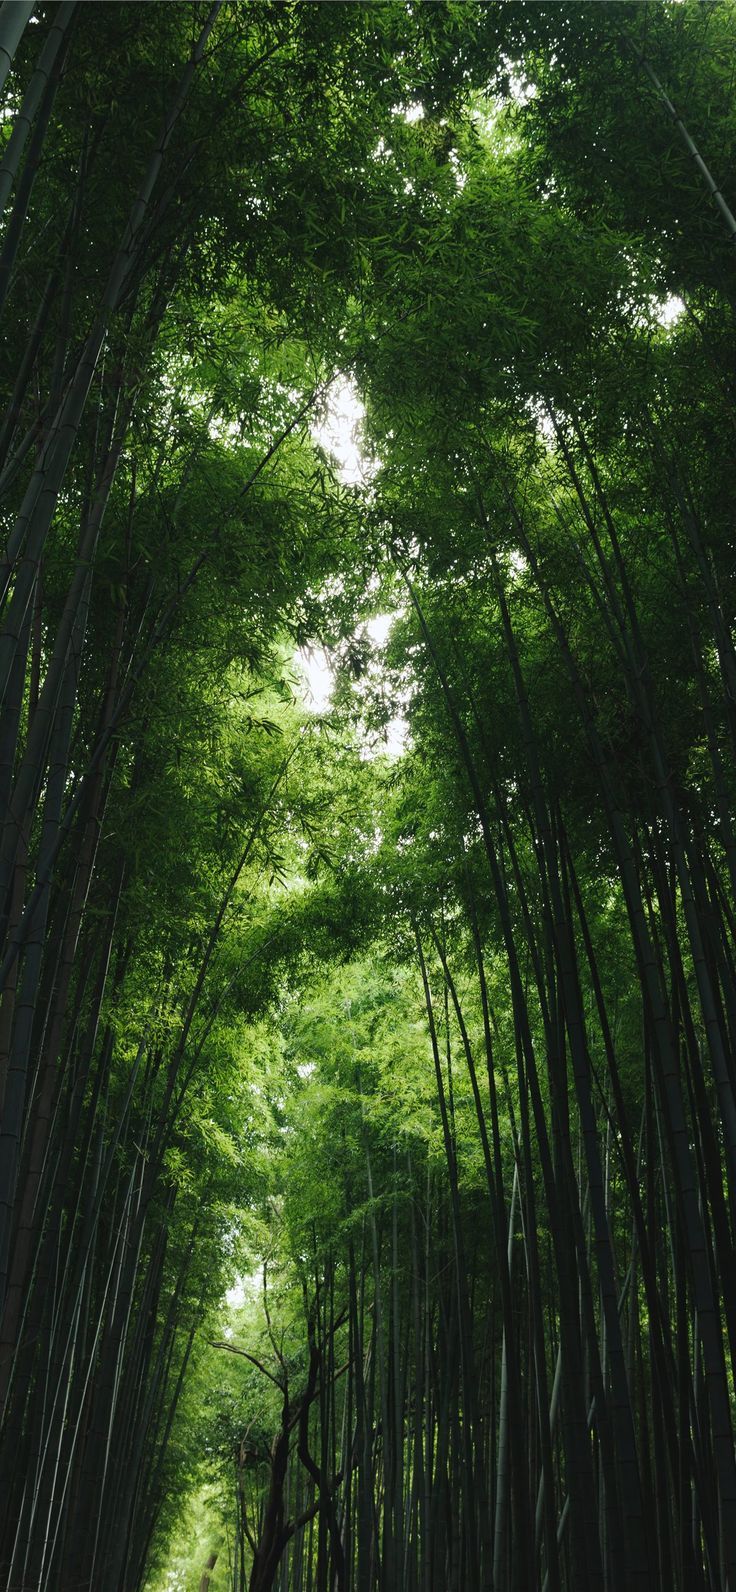 Looking up at the tall bamboo trees in Kyoto, Japan - Woods